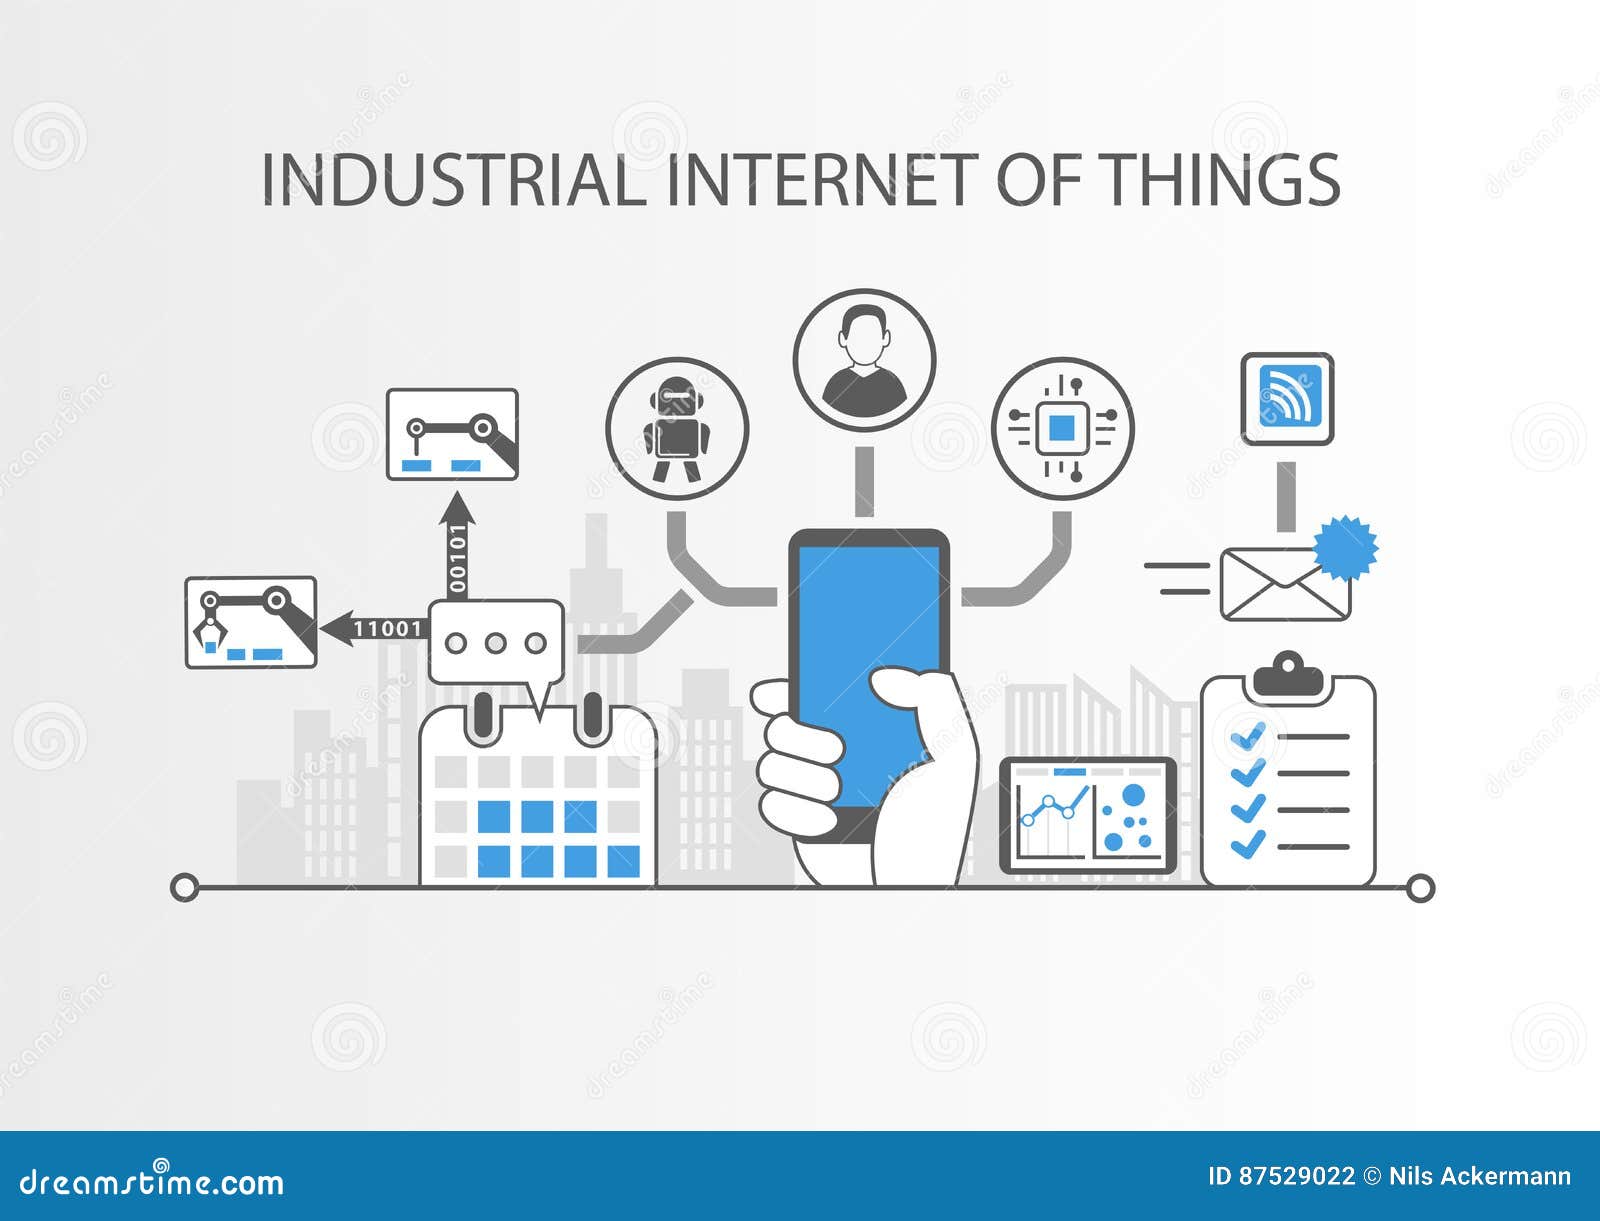 industrial internet of things or industry 4.0 concept with simple icons on grey background